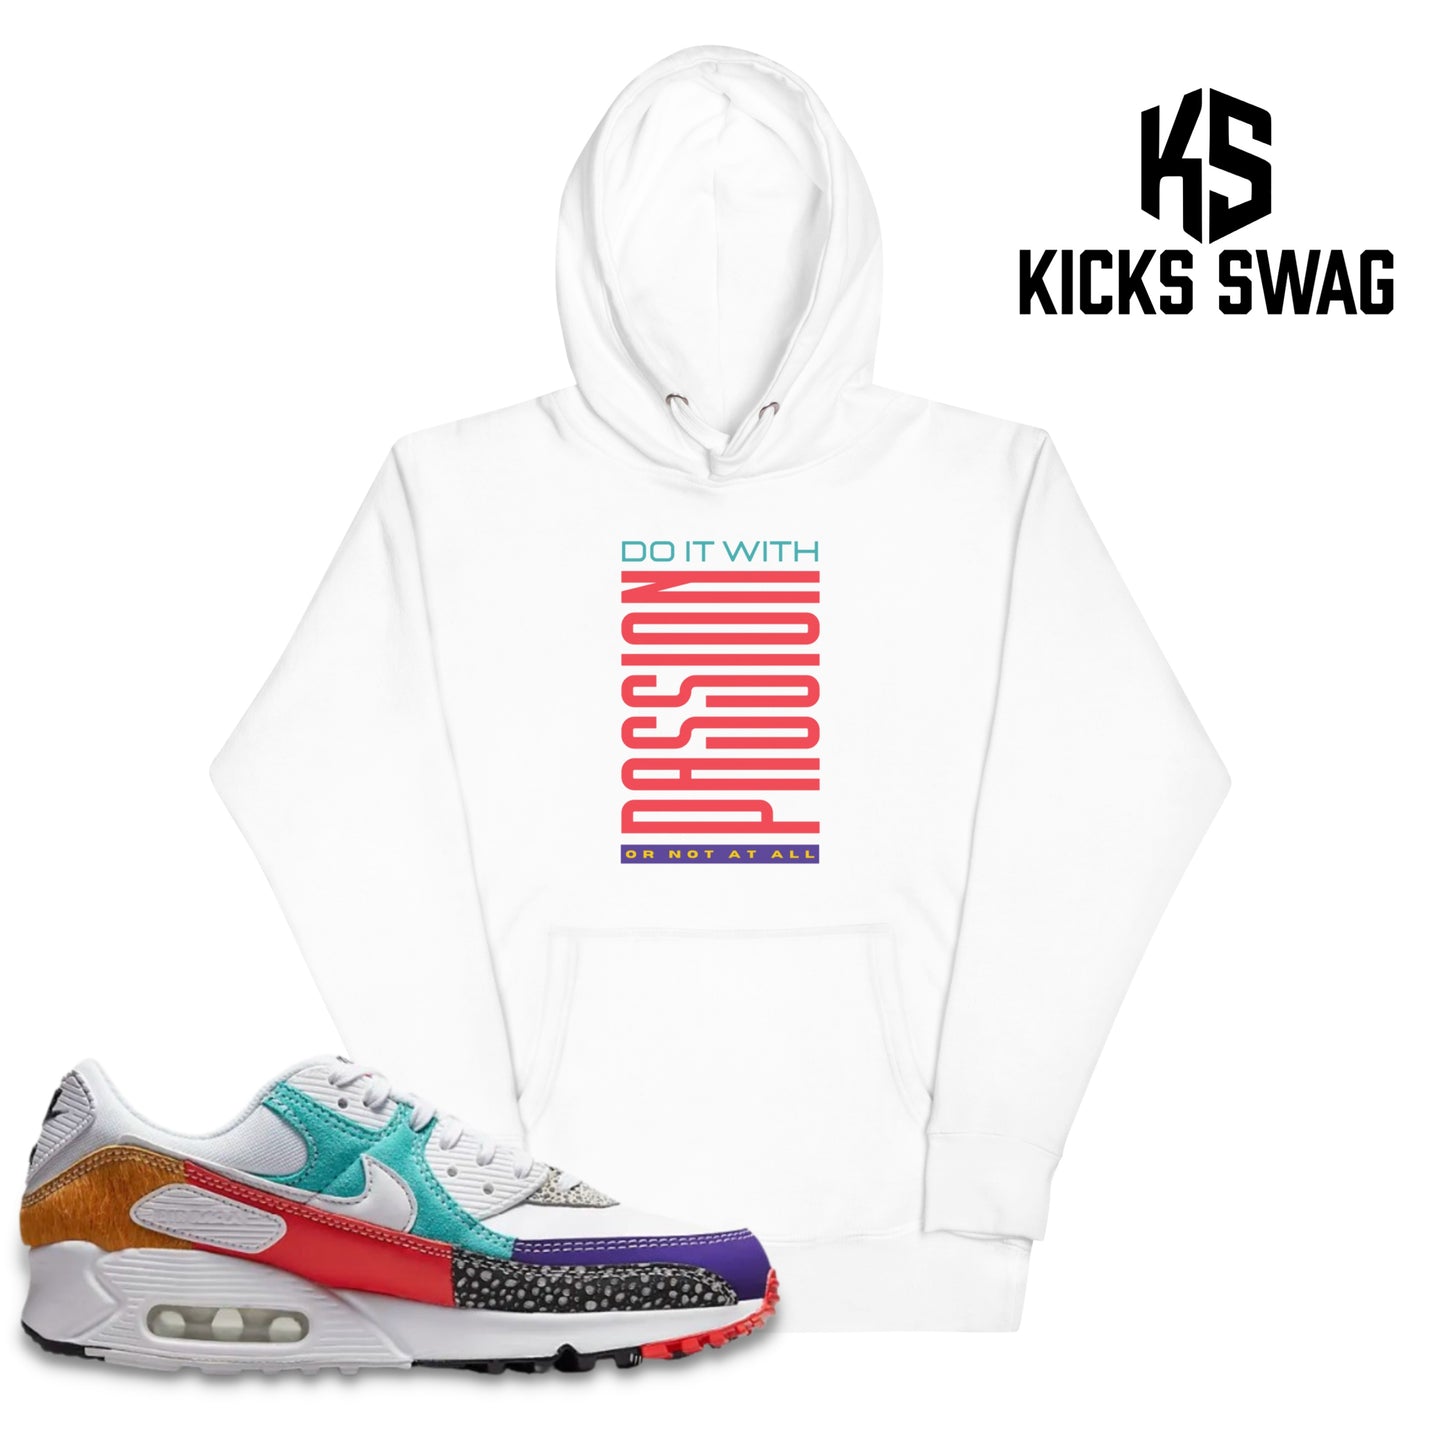 Hoodie - Nike Air Max 90 SE (Do it with passion or not at all)